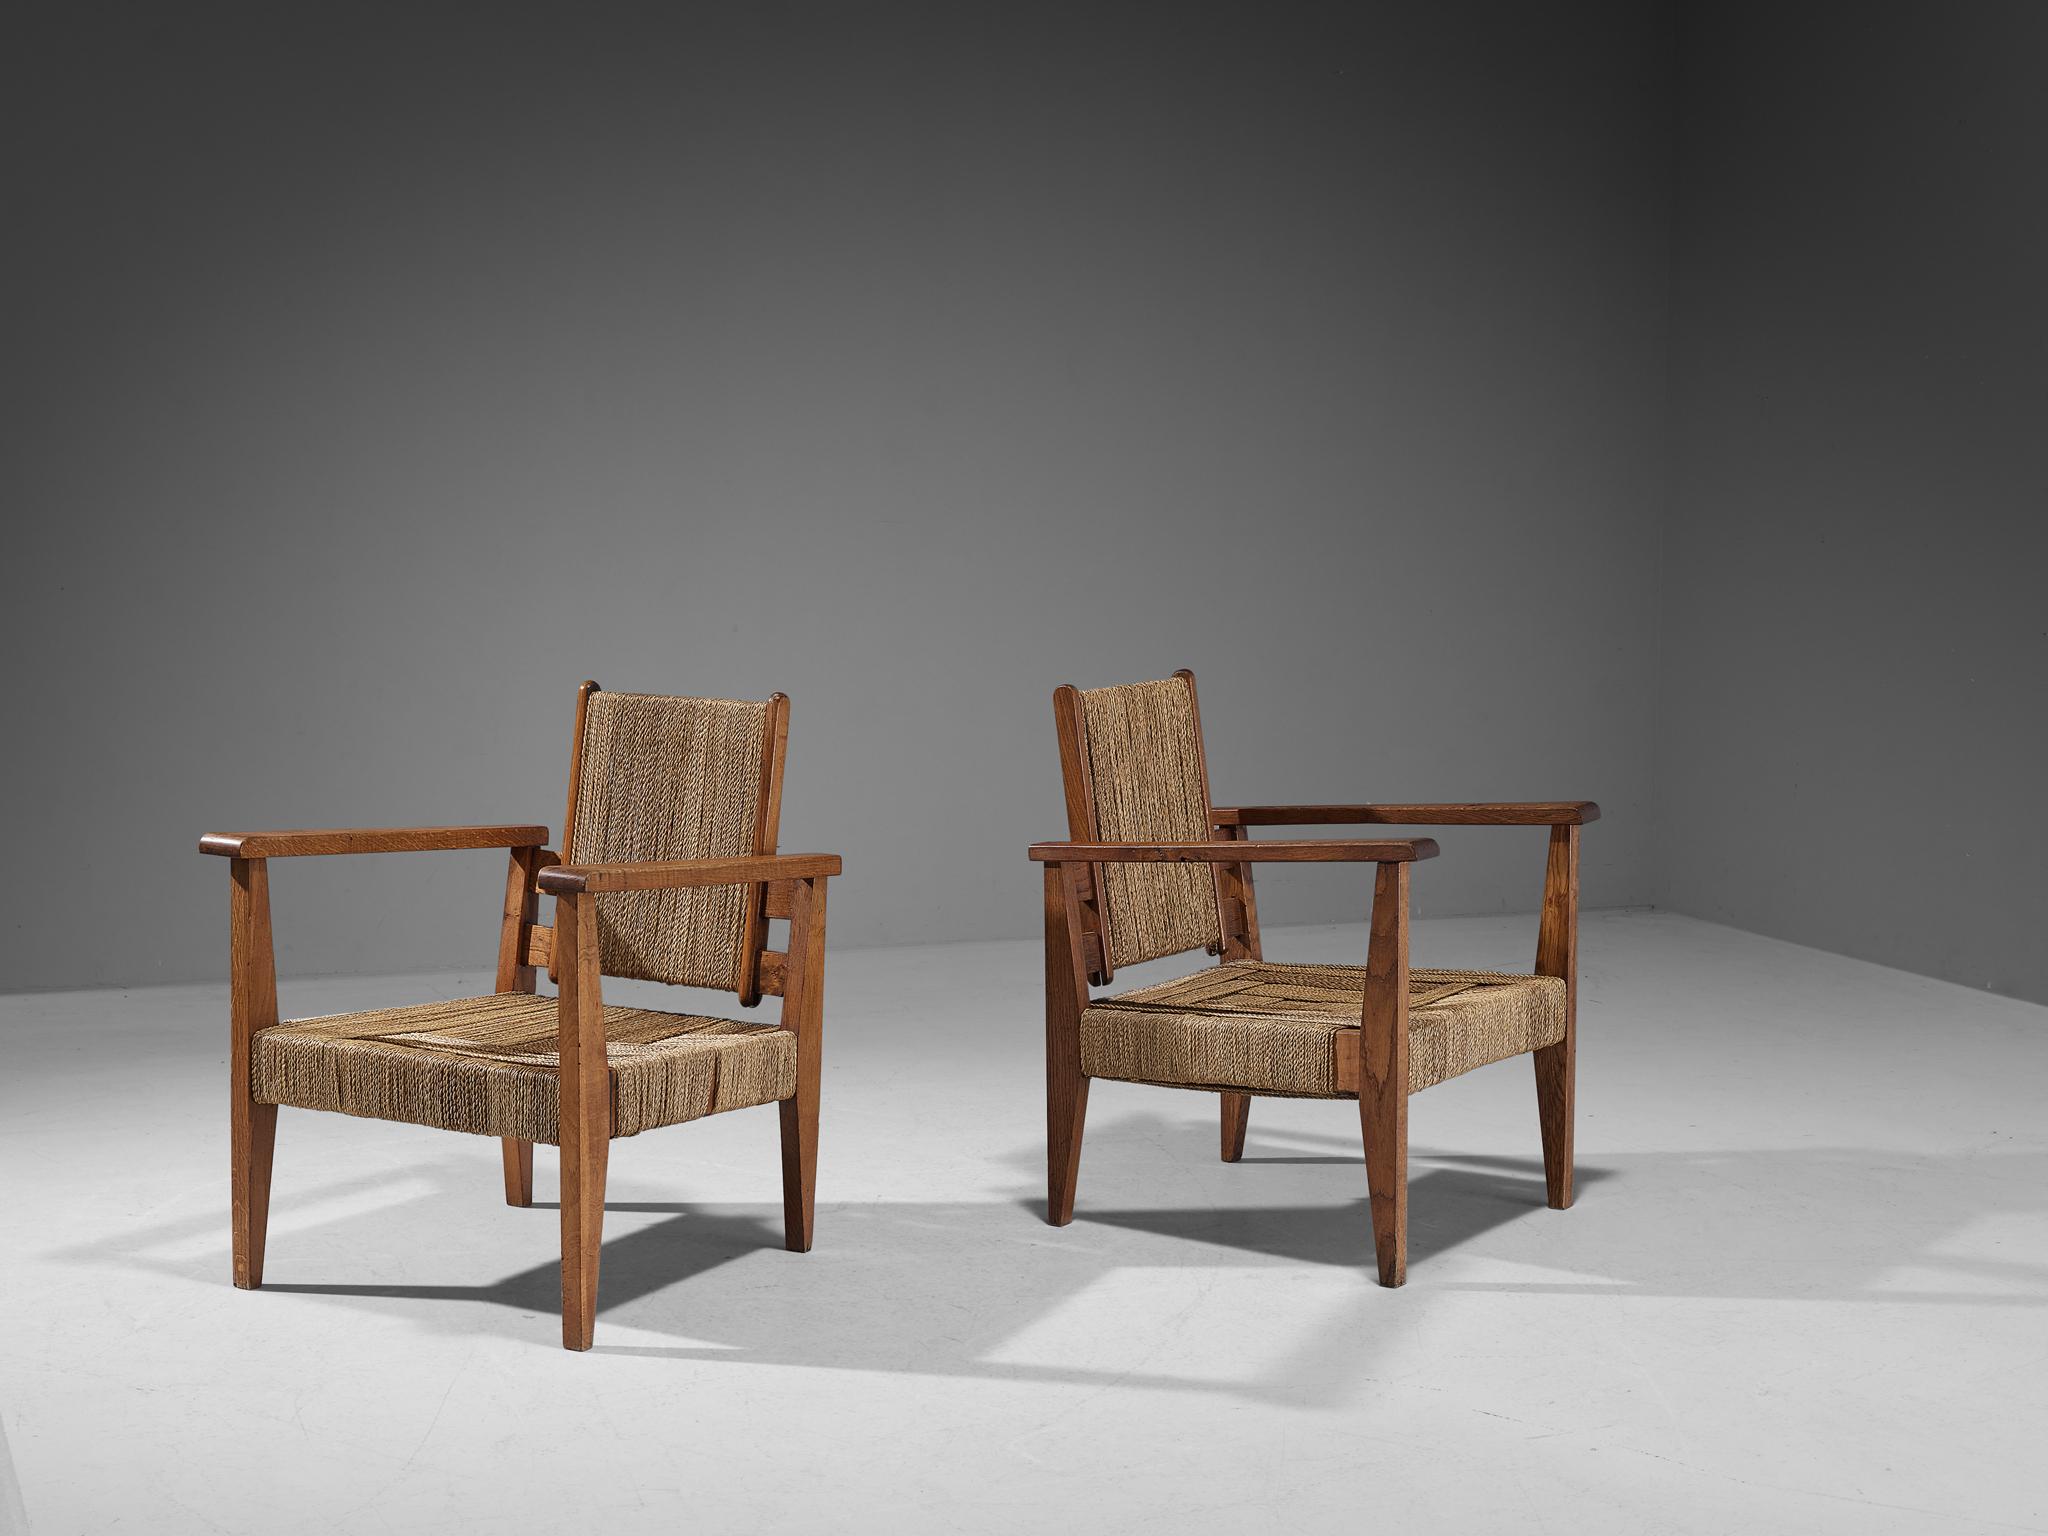 Victor Courtray, pair of armchairs, straw, oak, France, circa 1940

This rare pair of lounge chairs embraces an evolved provincial character with great quality of elegance. The type of upholstery and construction, give the chair a character of its